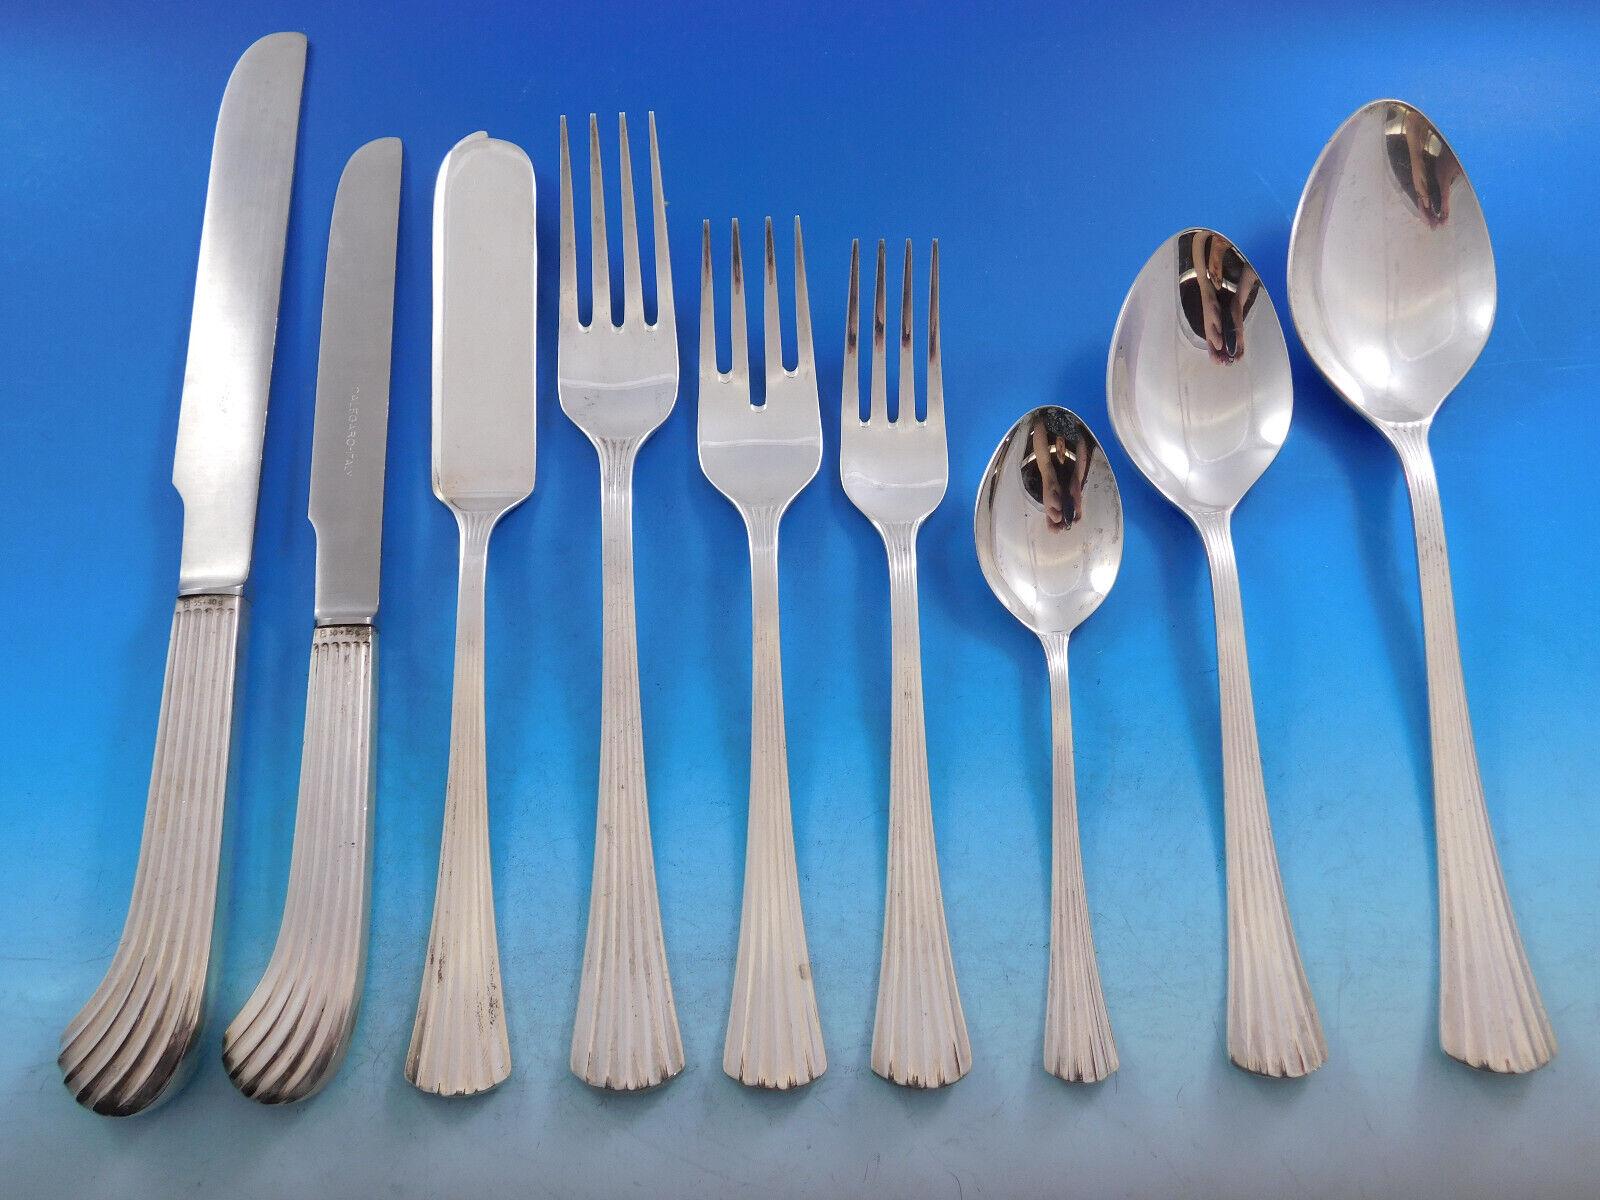 Superb Dinner size Pavillion by Calegaro Italian 925 Sterling Silver Flatware set - 121 pieces. This gorgeous service includes:

12 Large Dinner Size Knives, pistol grip handles, 10